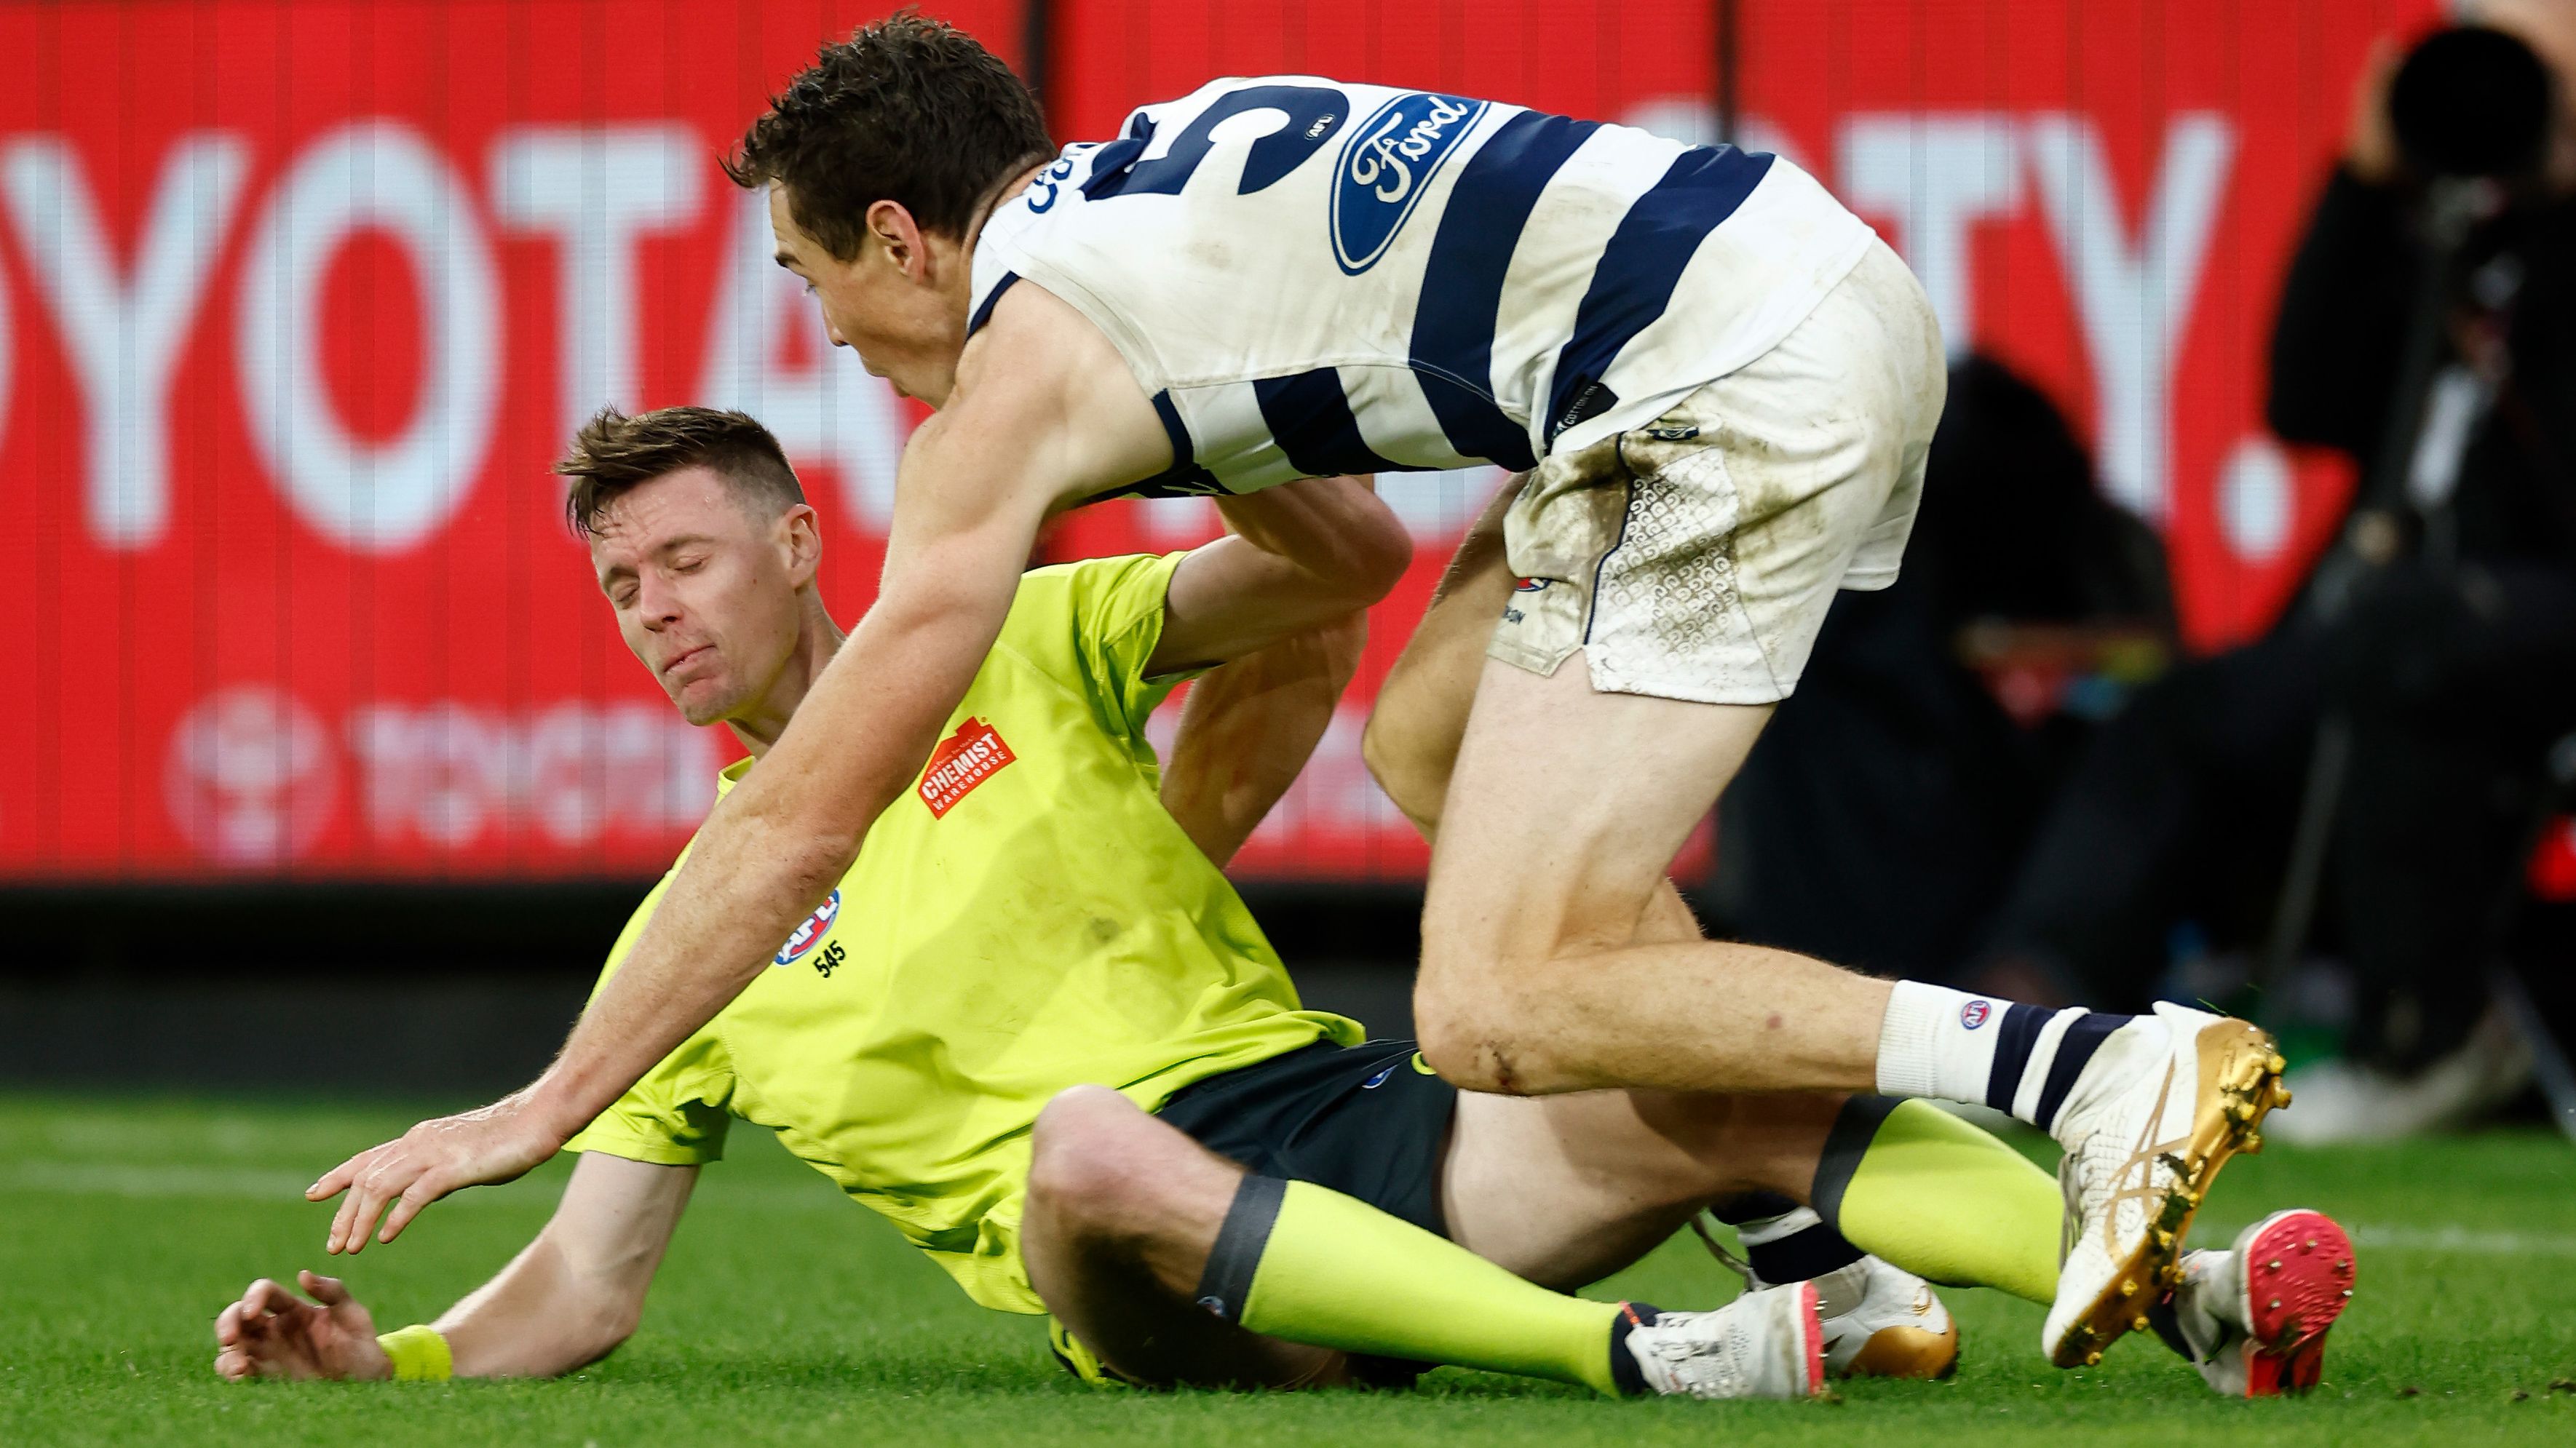 MELBOURNE, AUSTRALIA - APRIL 10: Jeremy Cameron of the Cats collides with the boundary umpire during the 2023 AFL Round 04 match between the Geelong Cats and the Hawthorn Hawks at the Melbourne Cricket Ground on April 10, 2023 in Melbourne, Australia. (Photo by Michael Willson/AFL Photos)